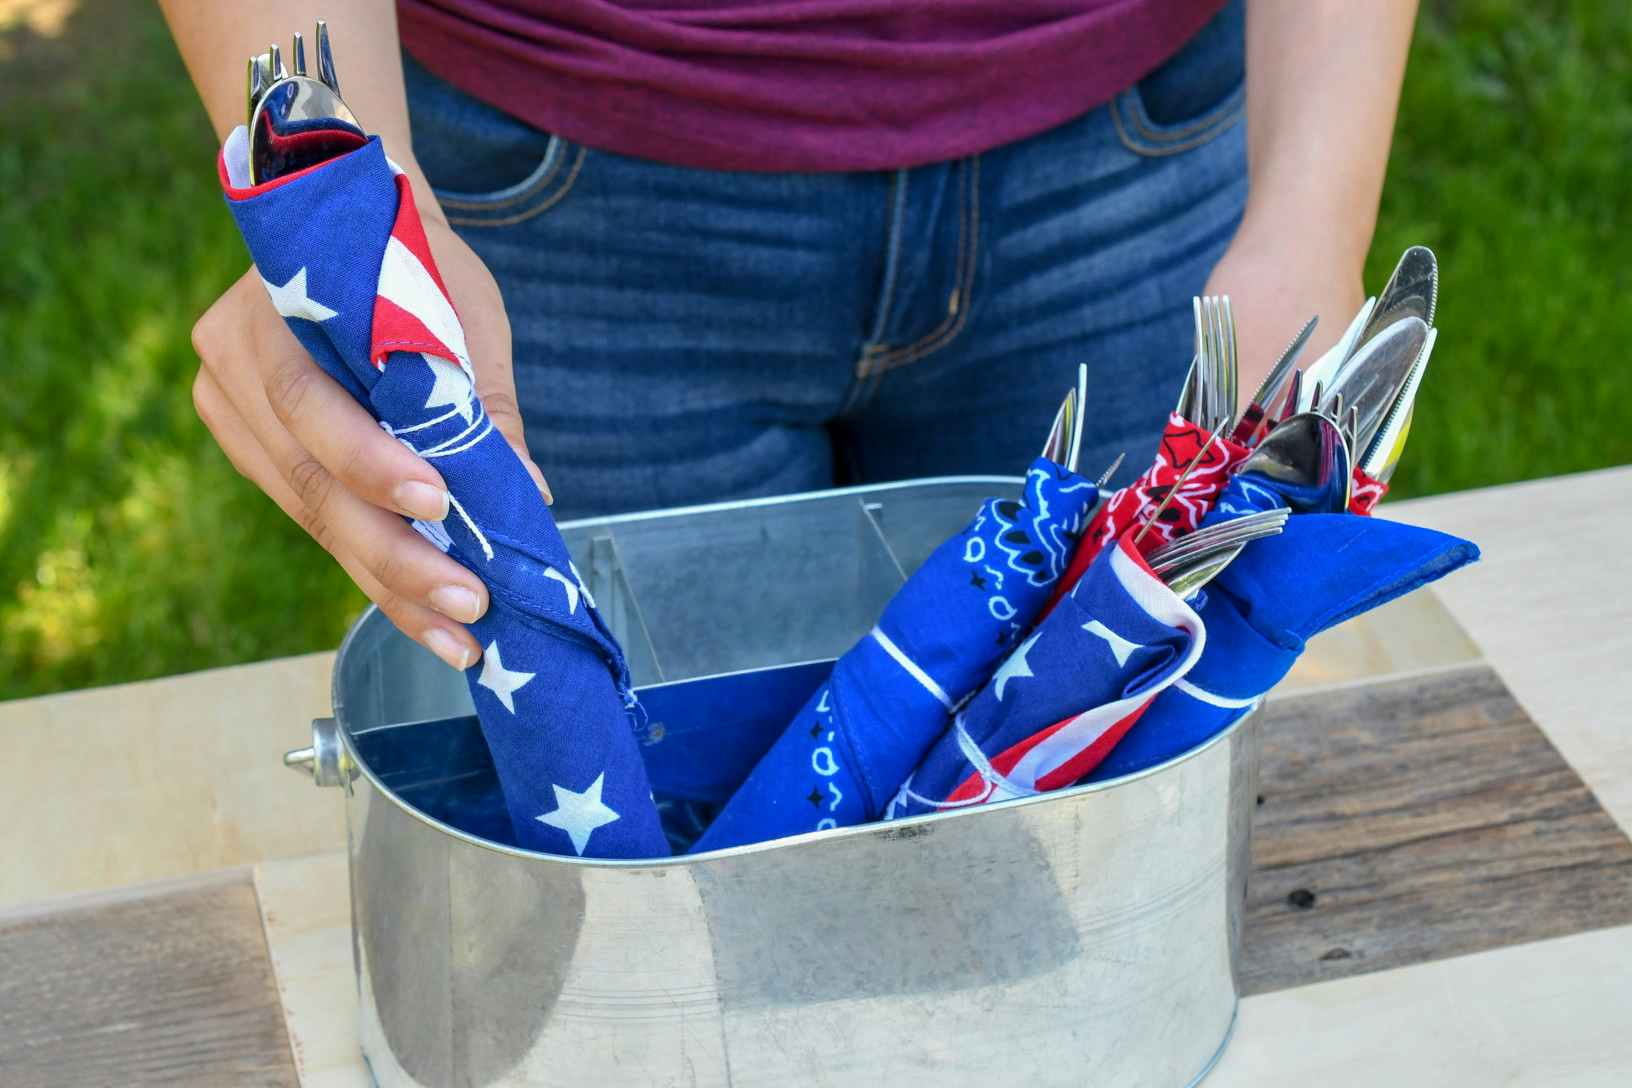 A person putting a set of silverware wrapped in a red, white, and blue bandana into a container with similarly wrapped silverware sets.